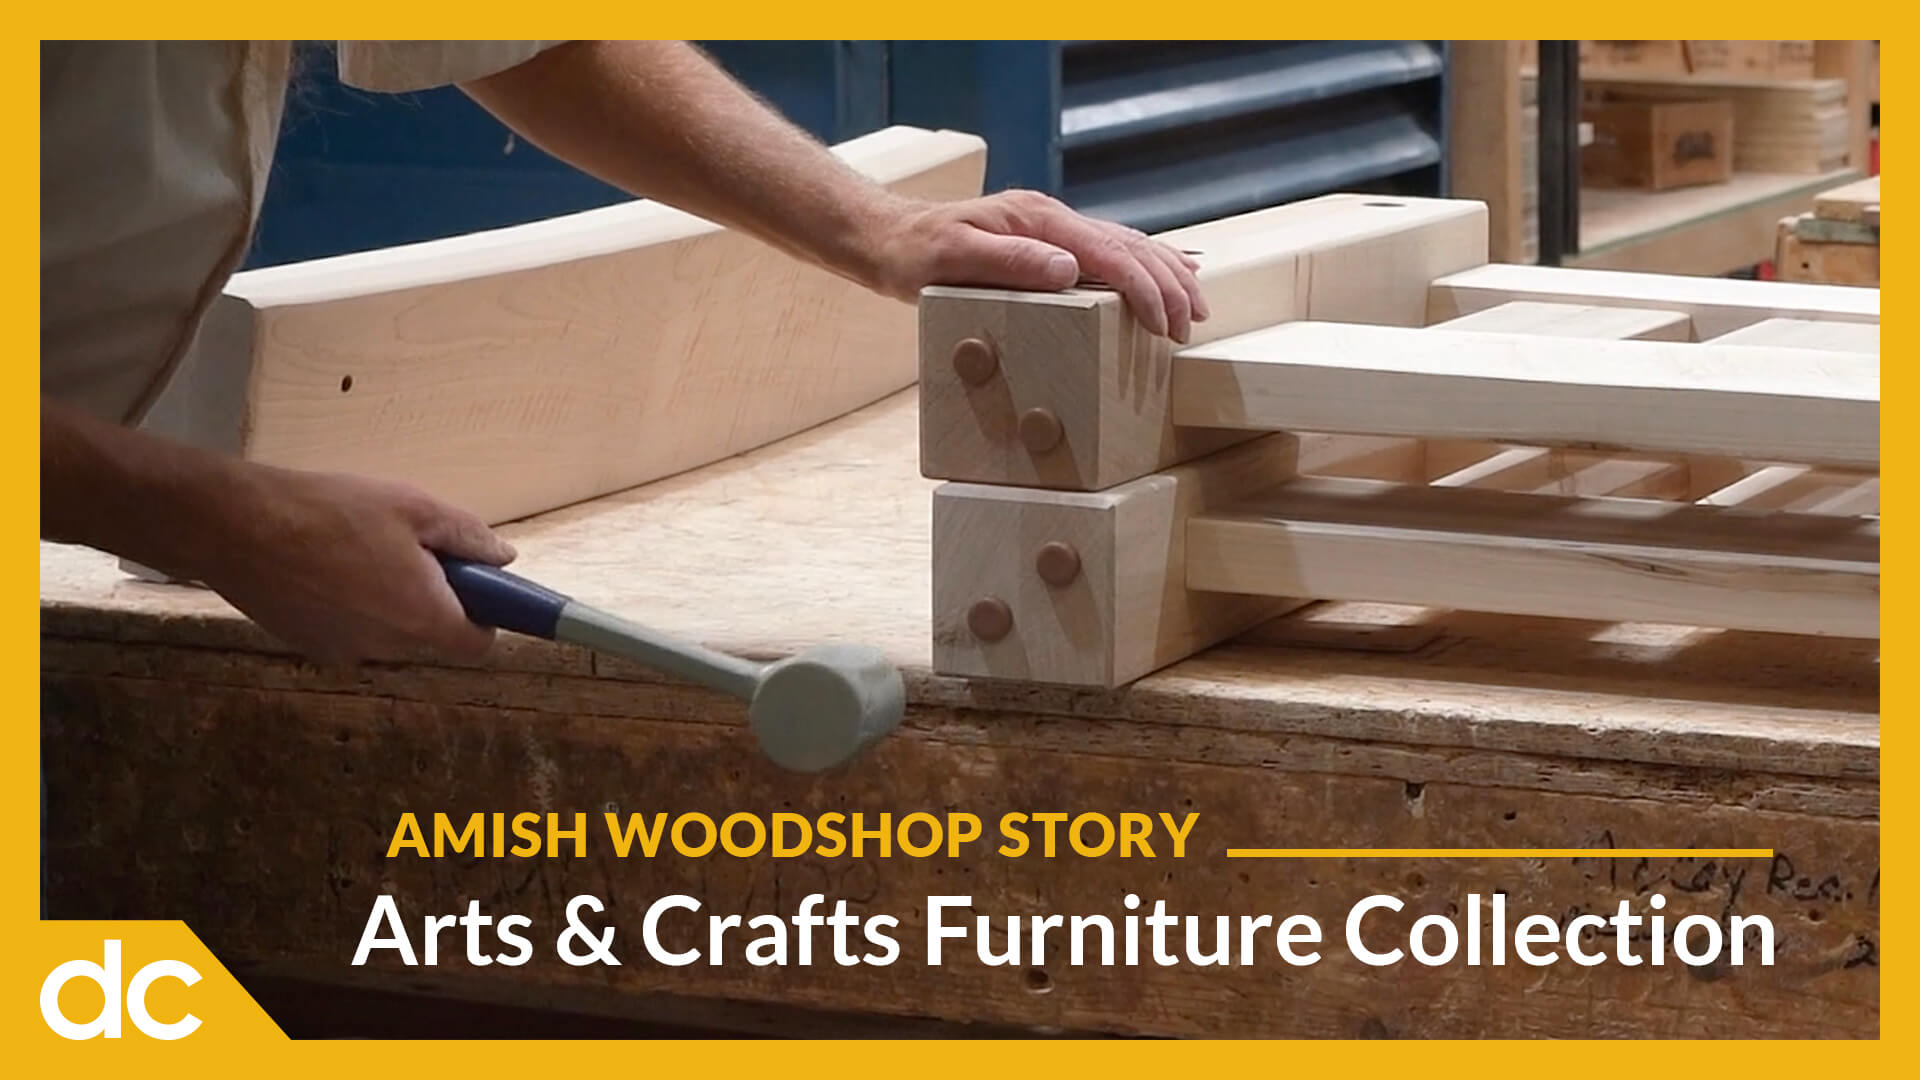 Amish Woodshop Story: Arts & Crafts Furniture Collection Video Title Image